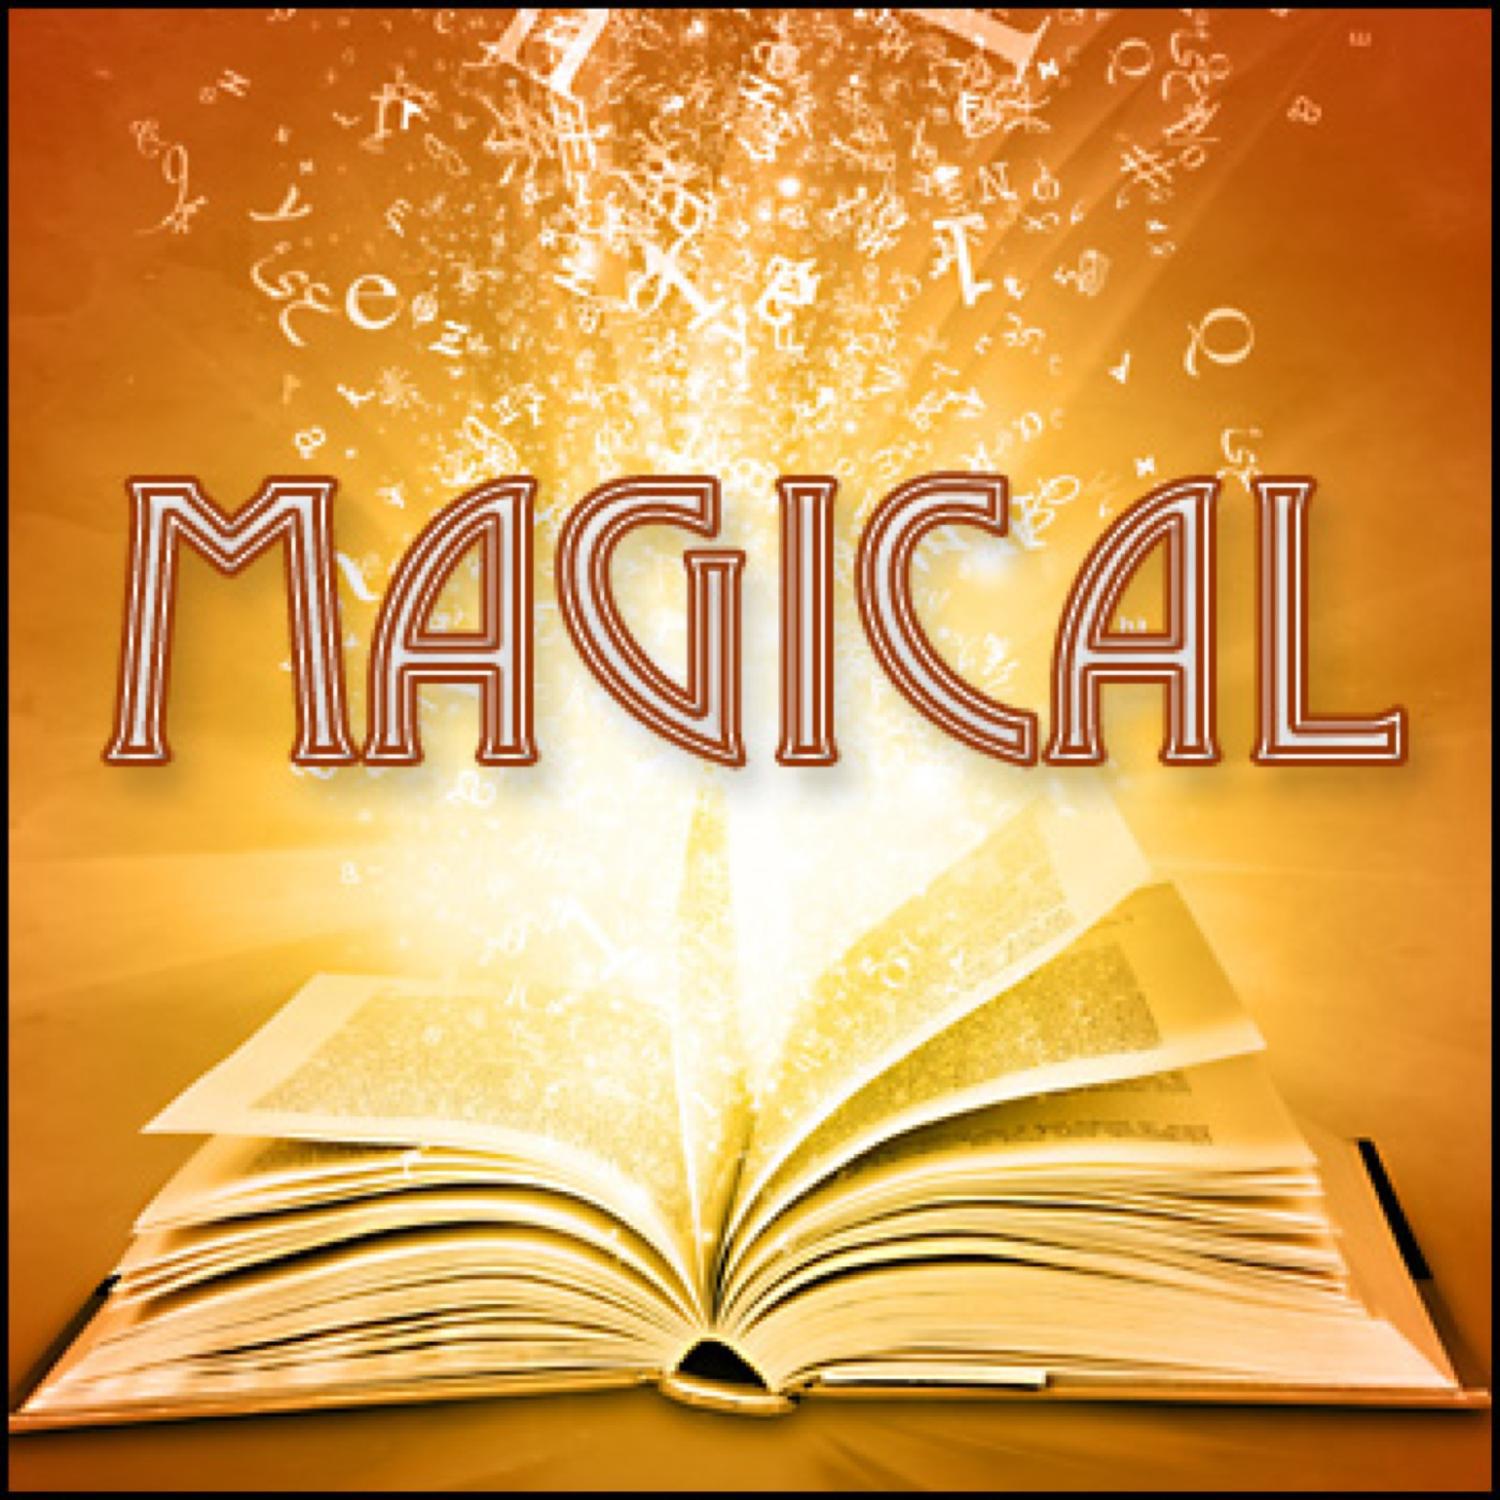 Magical: Sound Effects